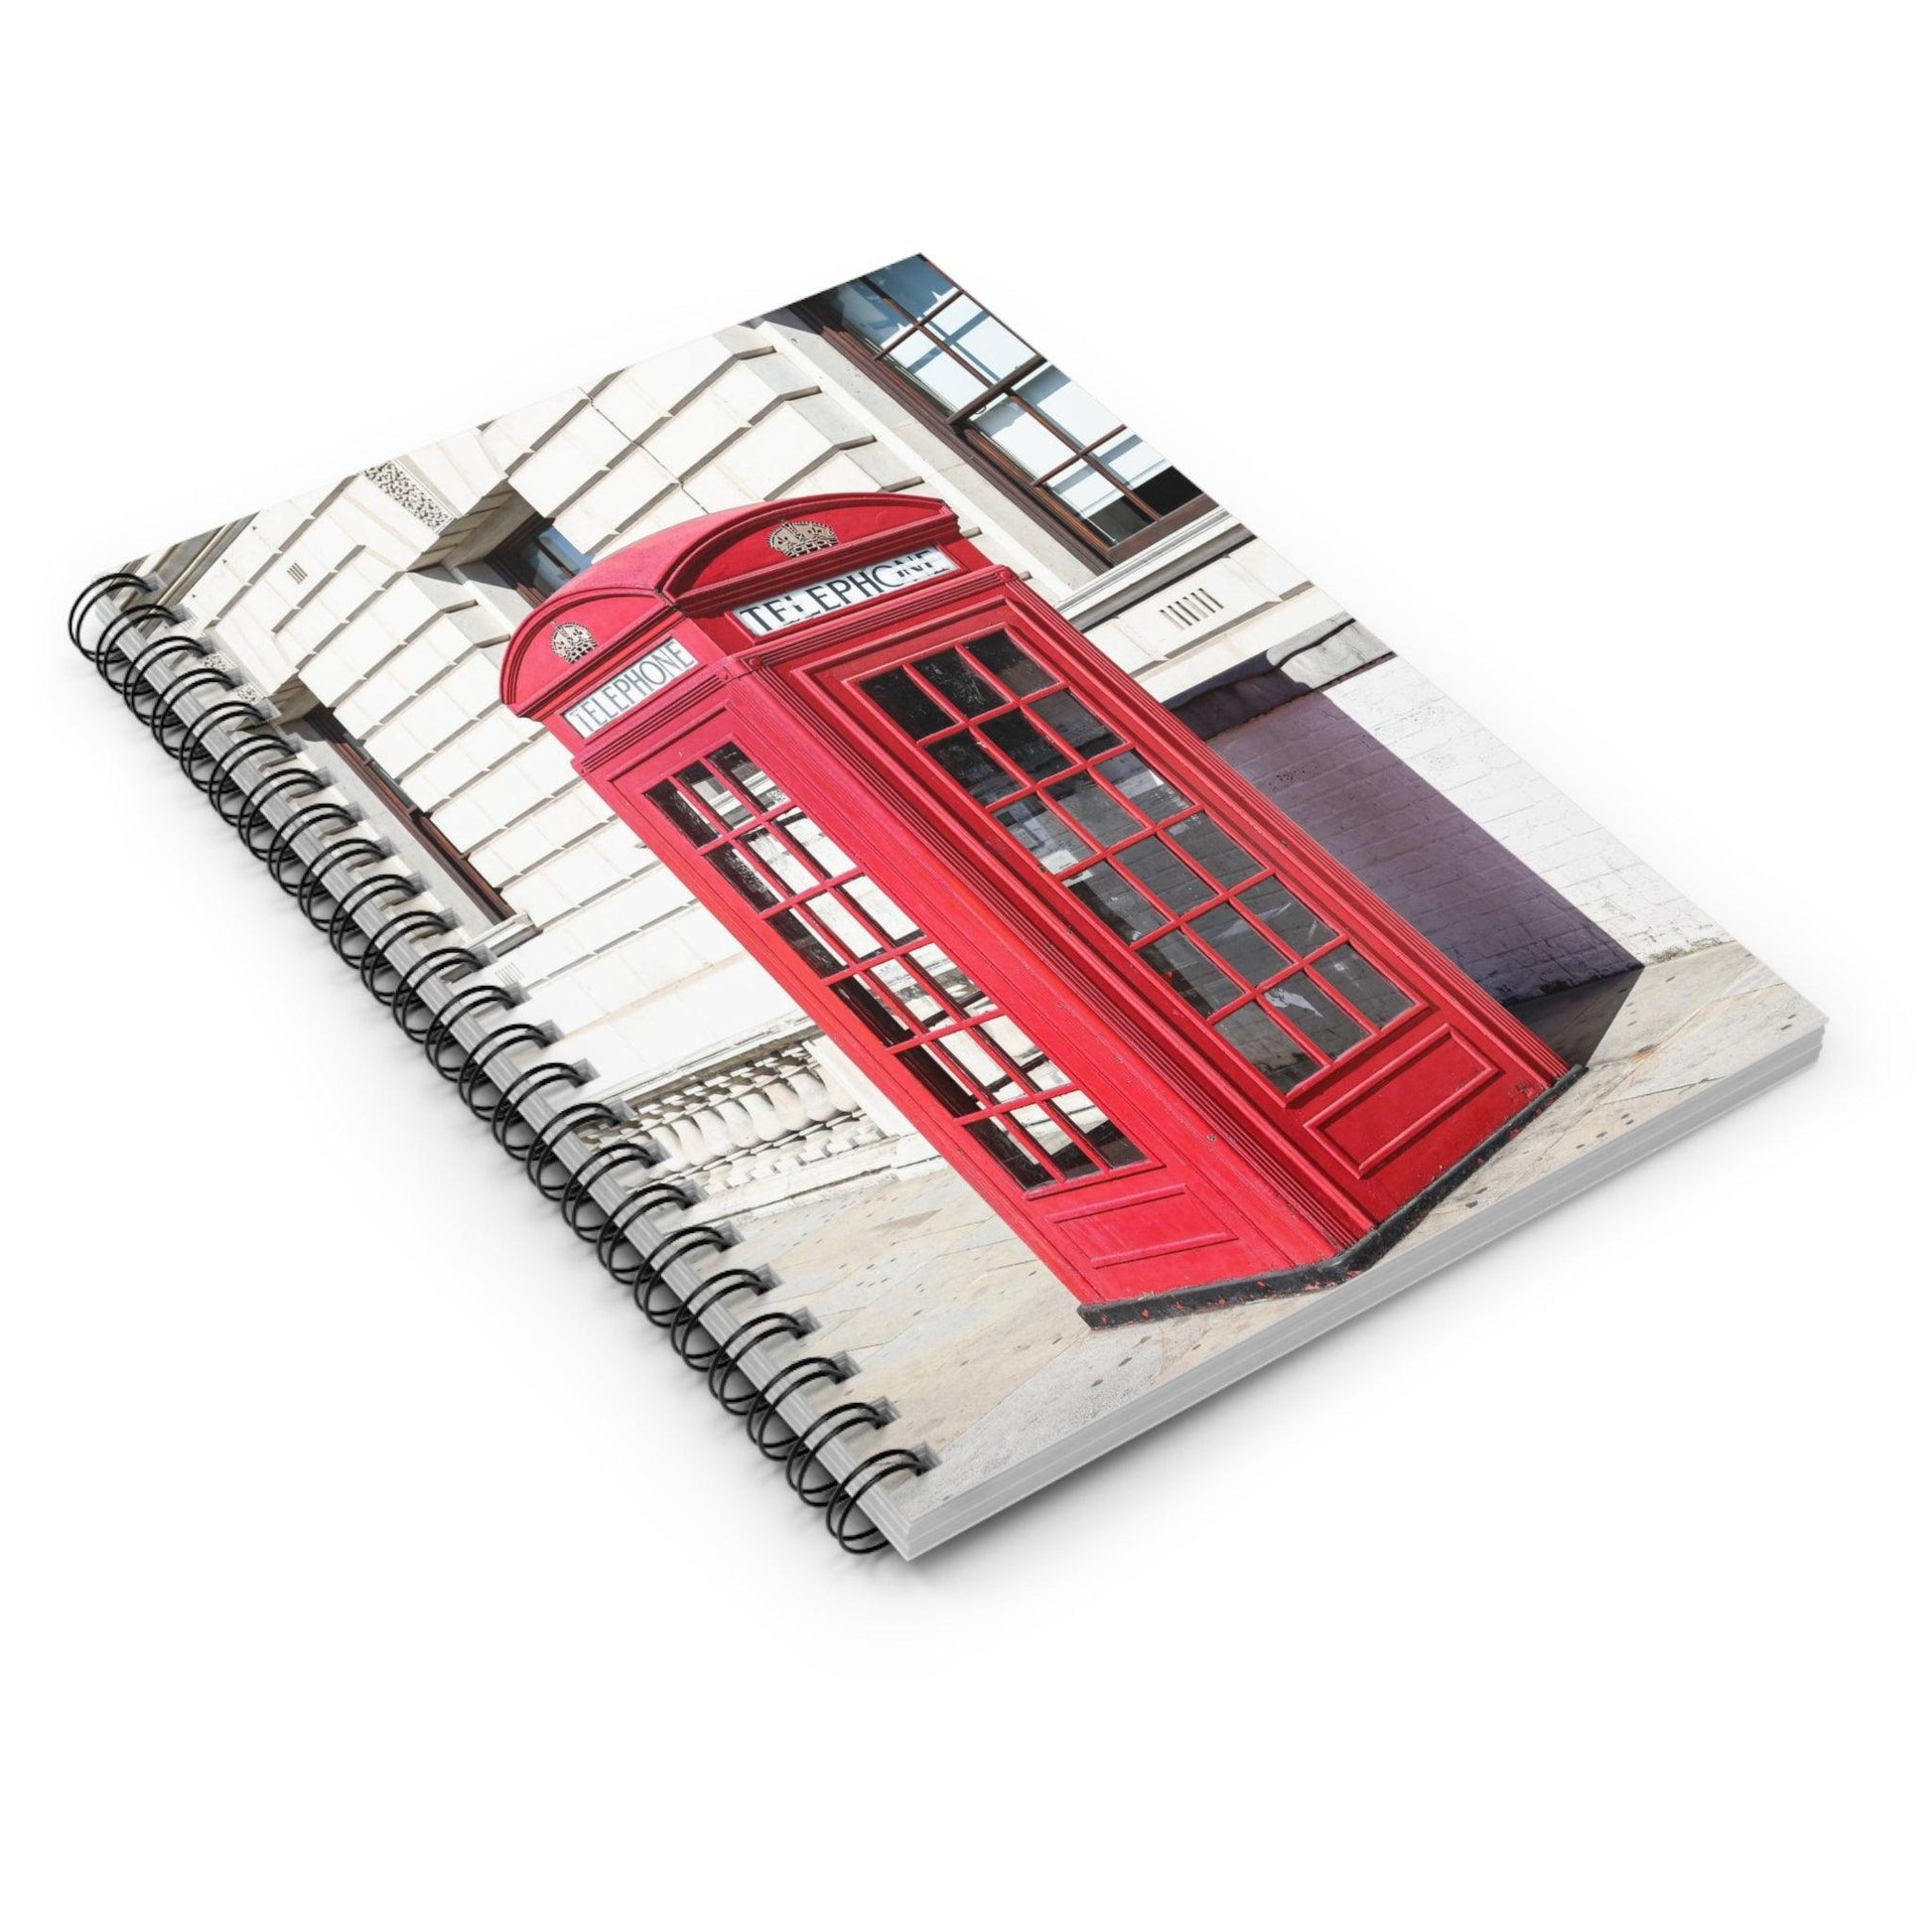 Red London Telephone Booth Spiral Notebook - Departures Print Shop